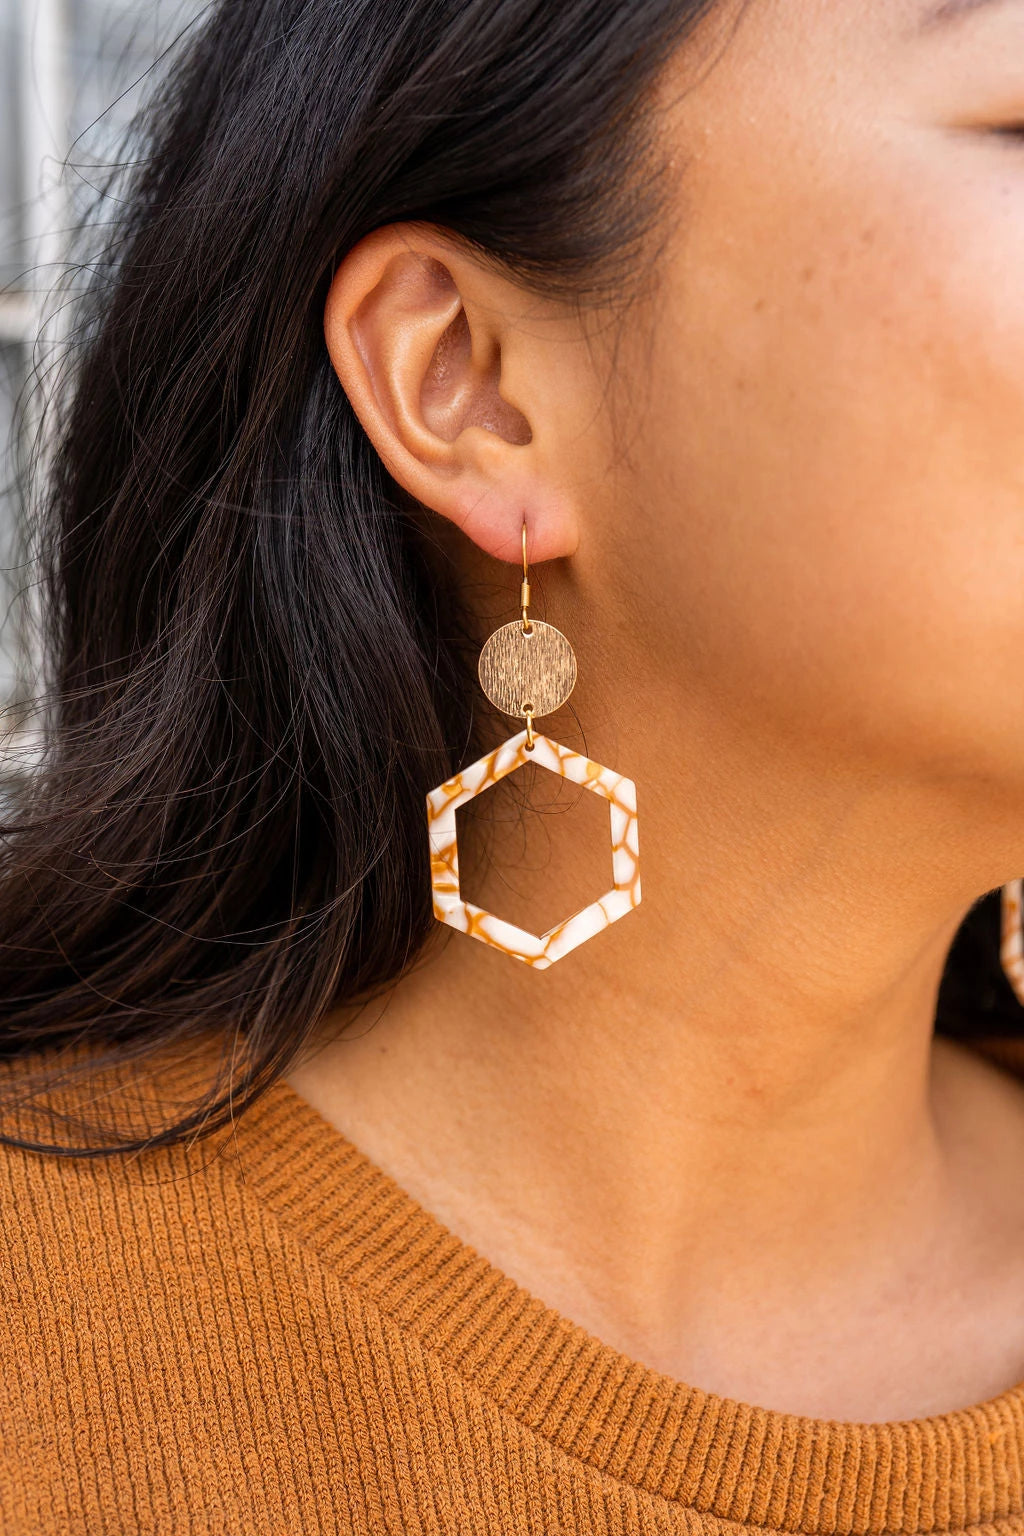 Lennox is a fun style with cut-out hexagon charms paired perfectly with gold accents.  18k gold-plated hypoallergenic stainless steel hooks Gold-plated brushed brass charms Lightweight and durable plant-based acetate acrylic charms in pumpkin spice